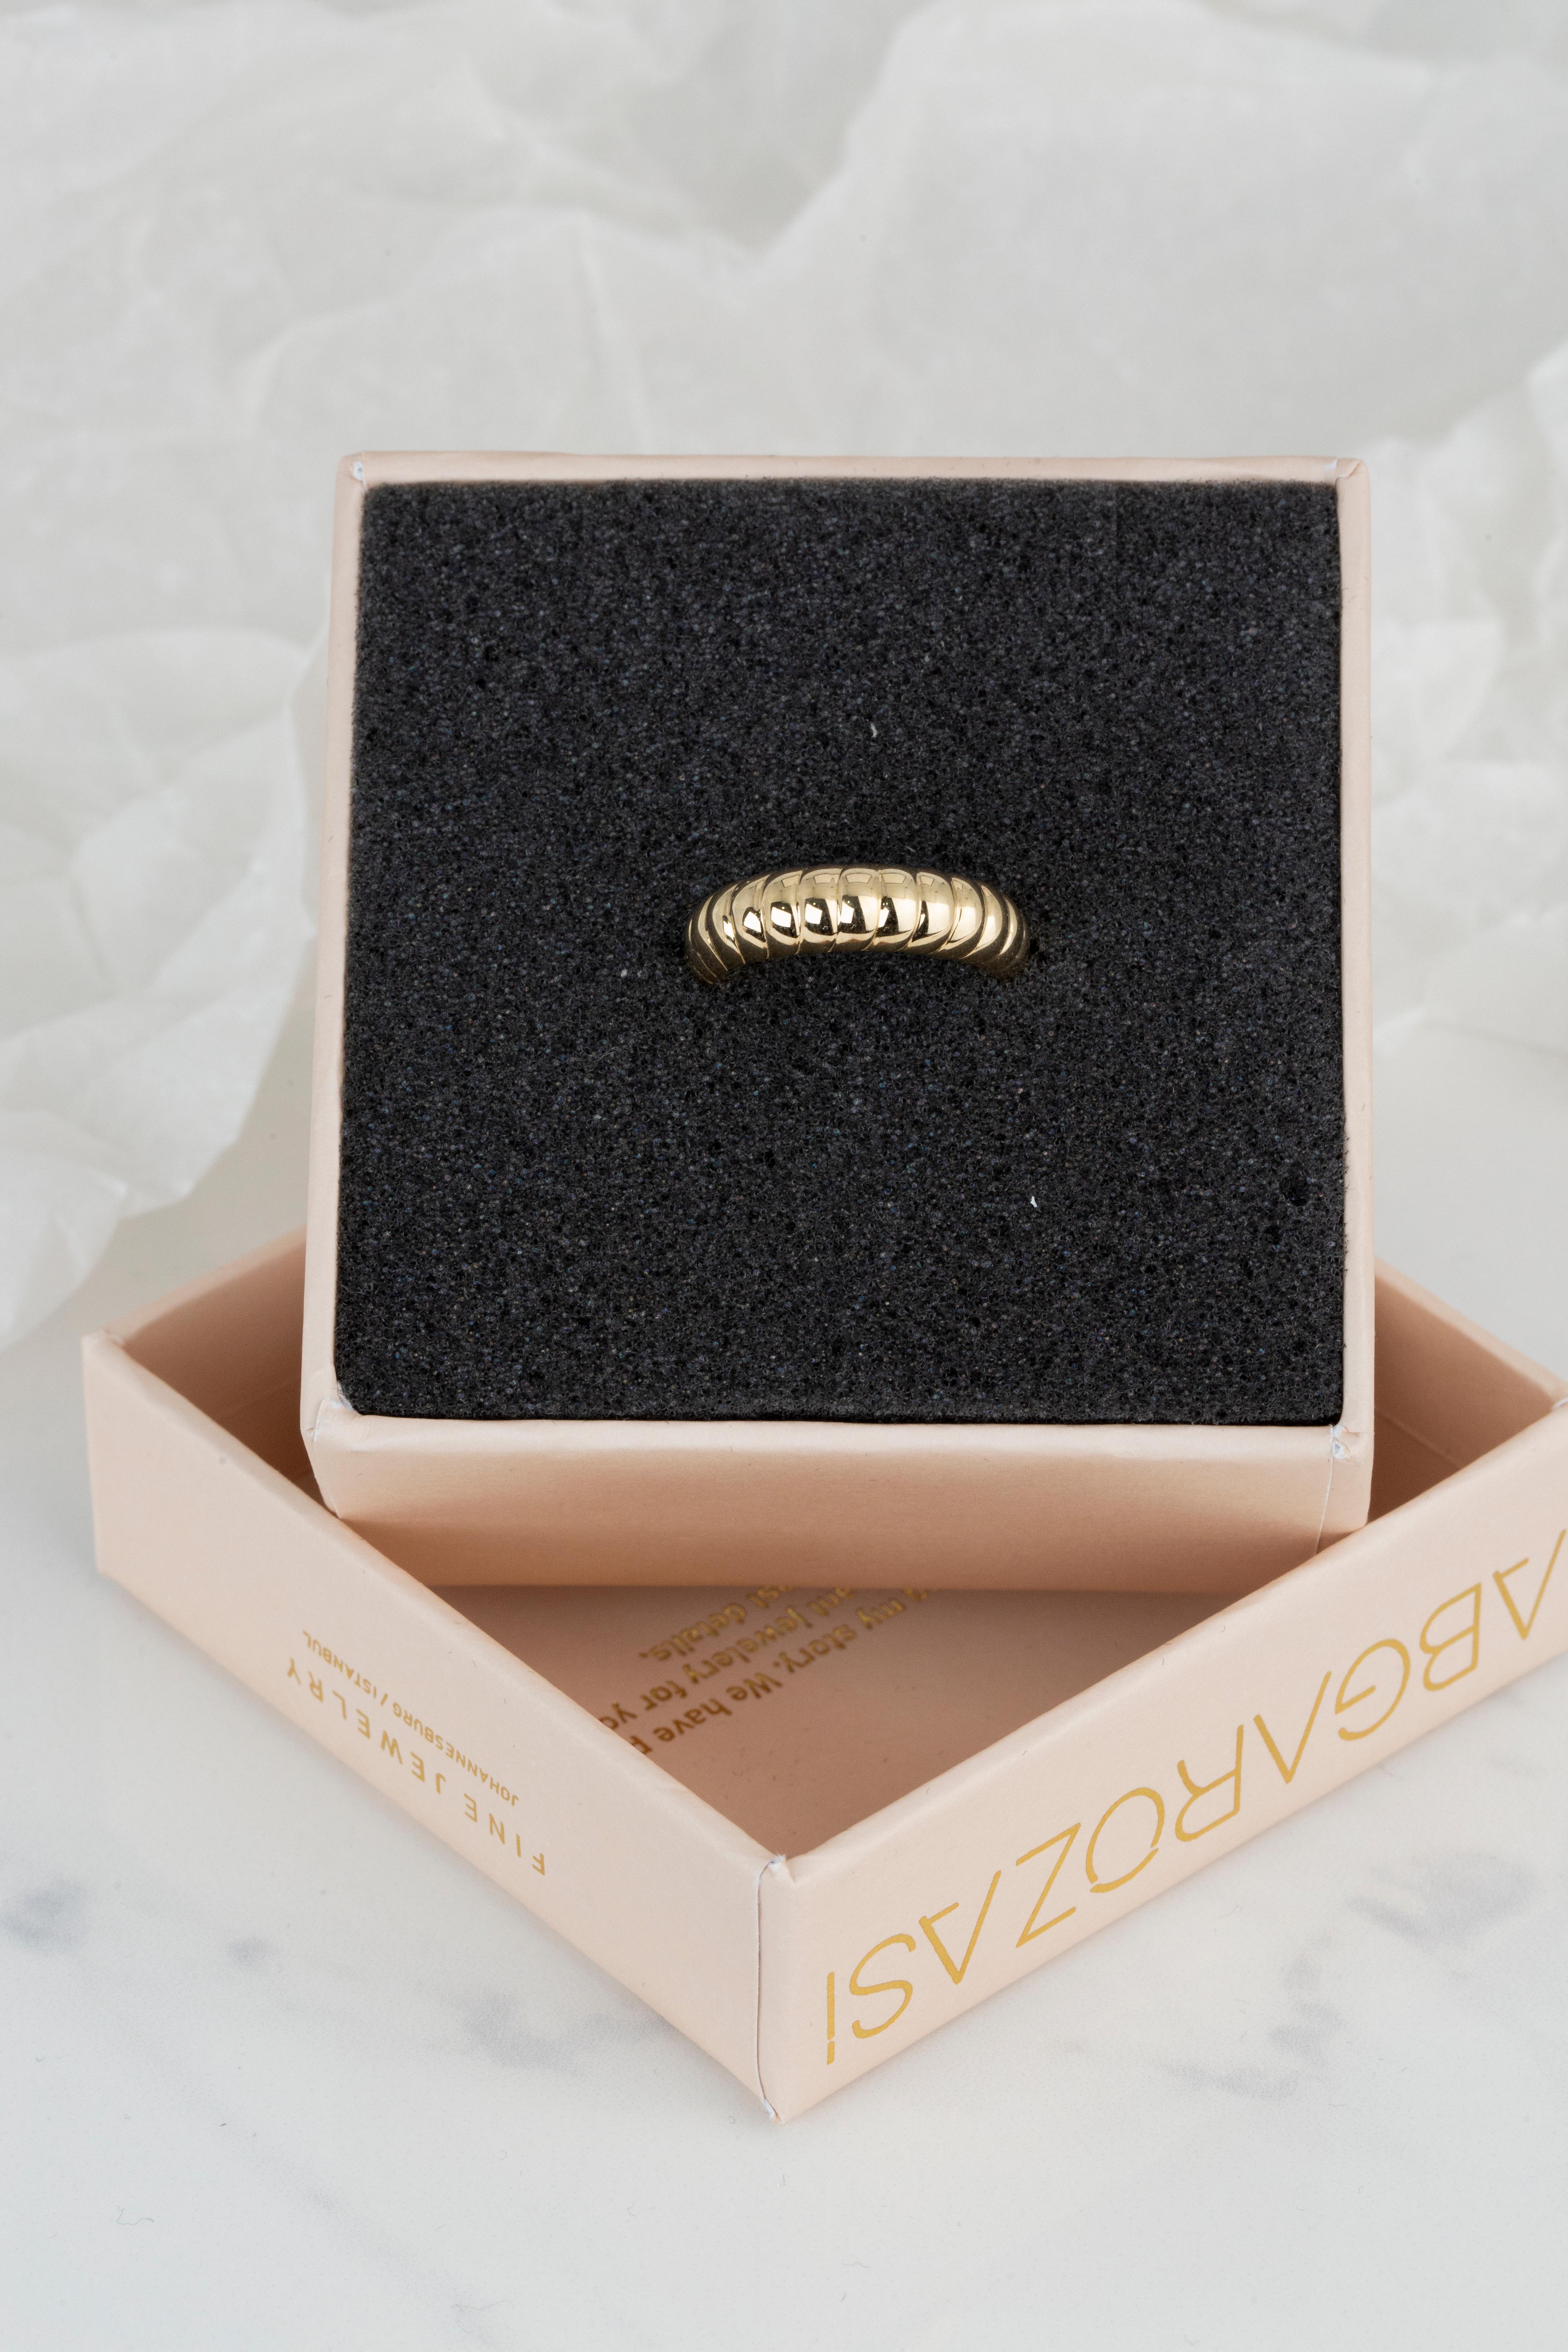 For Sale:  14K Gold Croissant Ring, Half Croissant Ring, Dome Ring 5